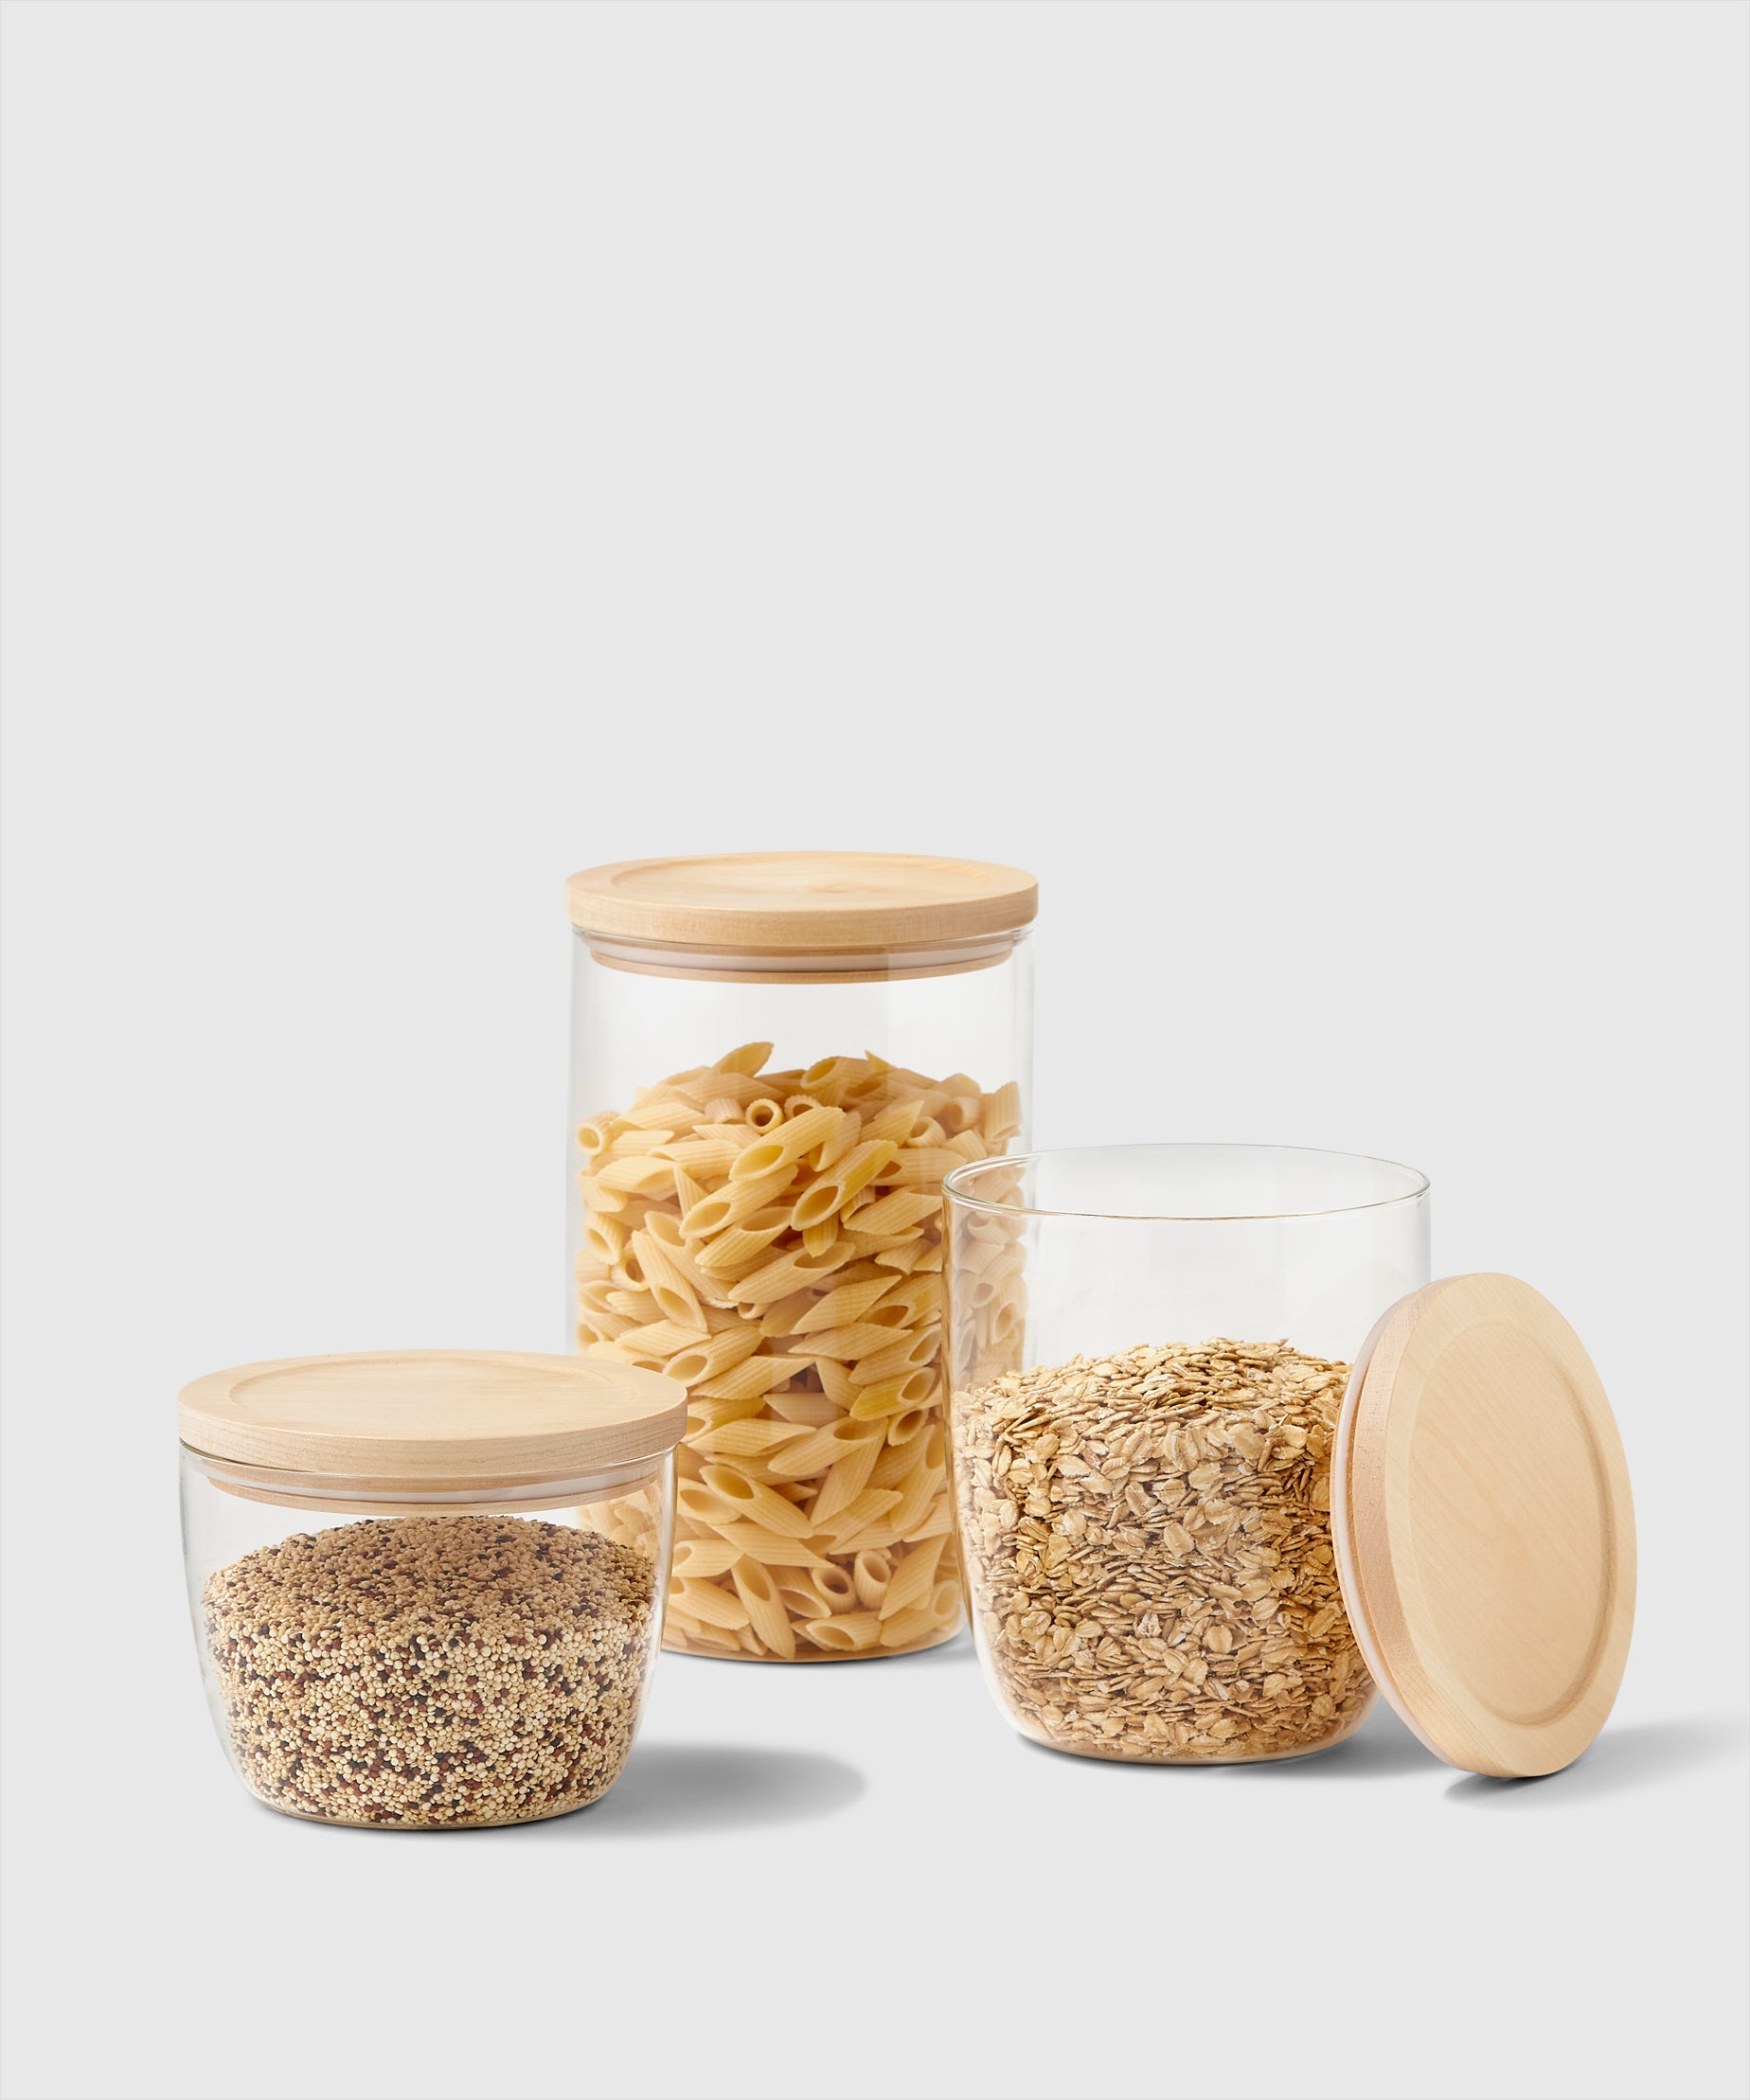 Tidy & Co. Set of 4 Stackable Storage Bins w/ Bamboo Lids 